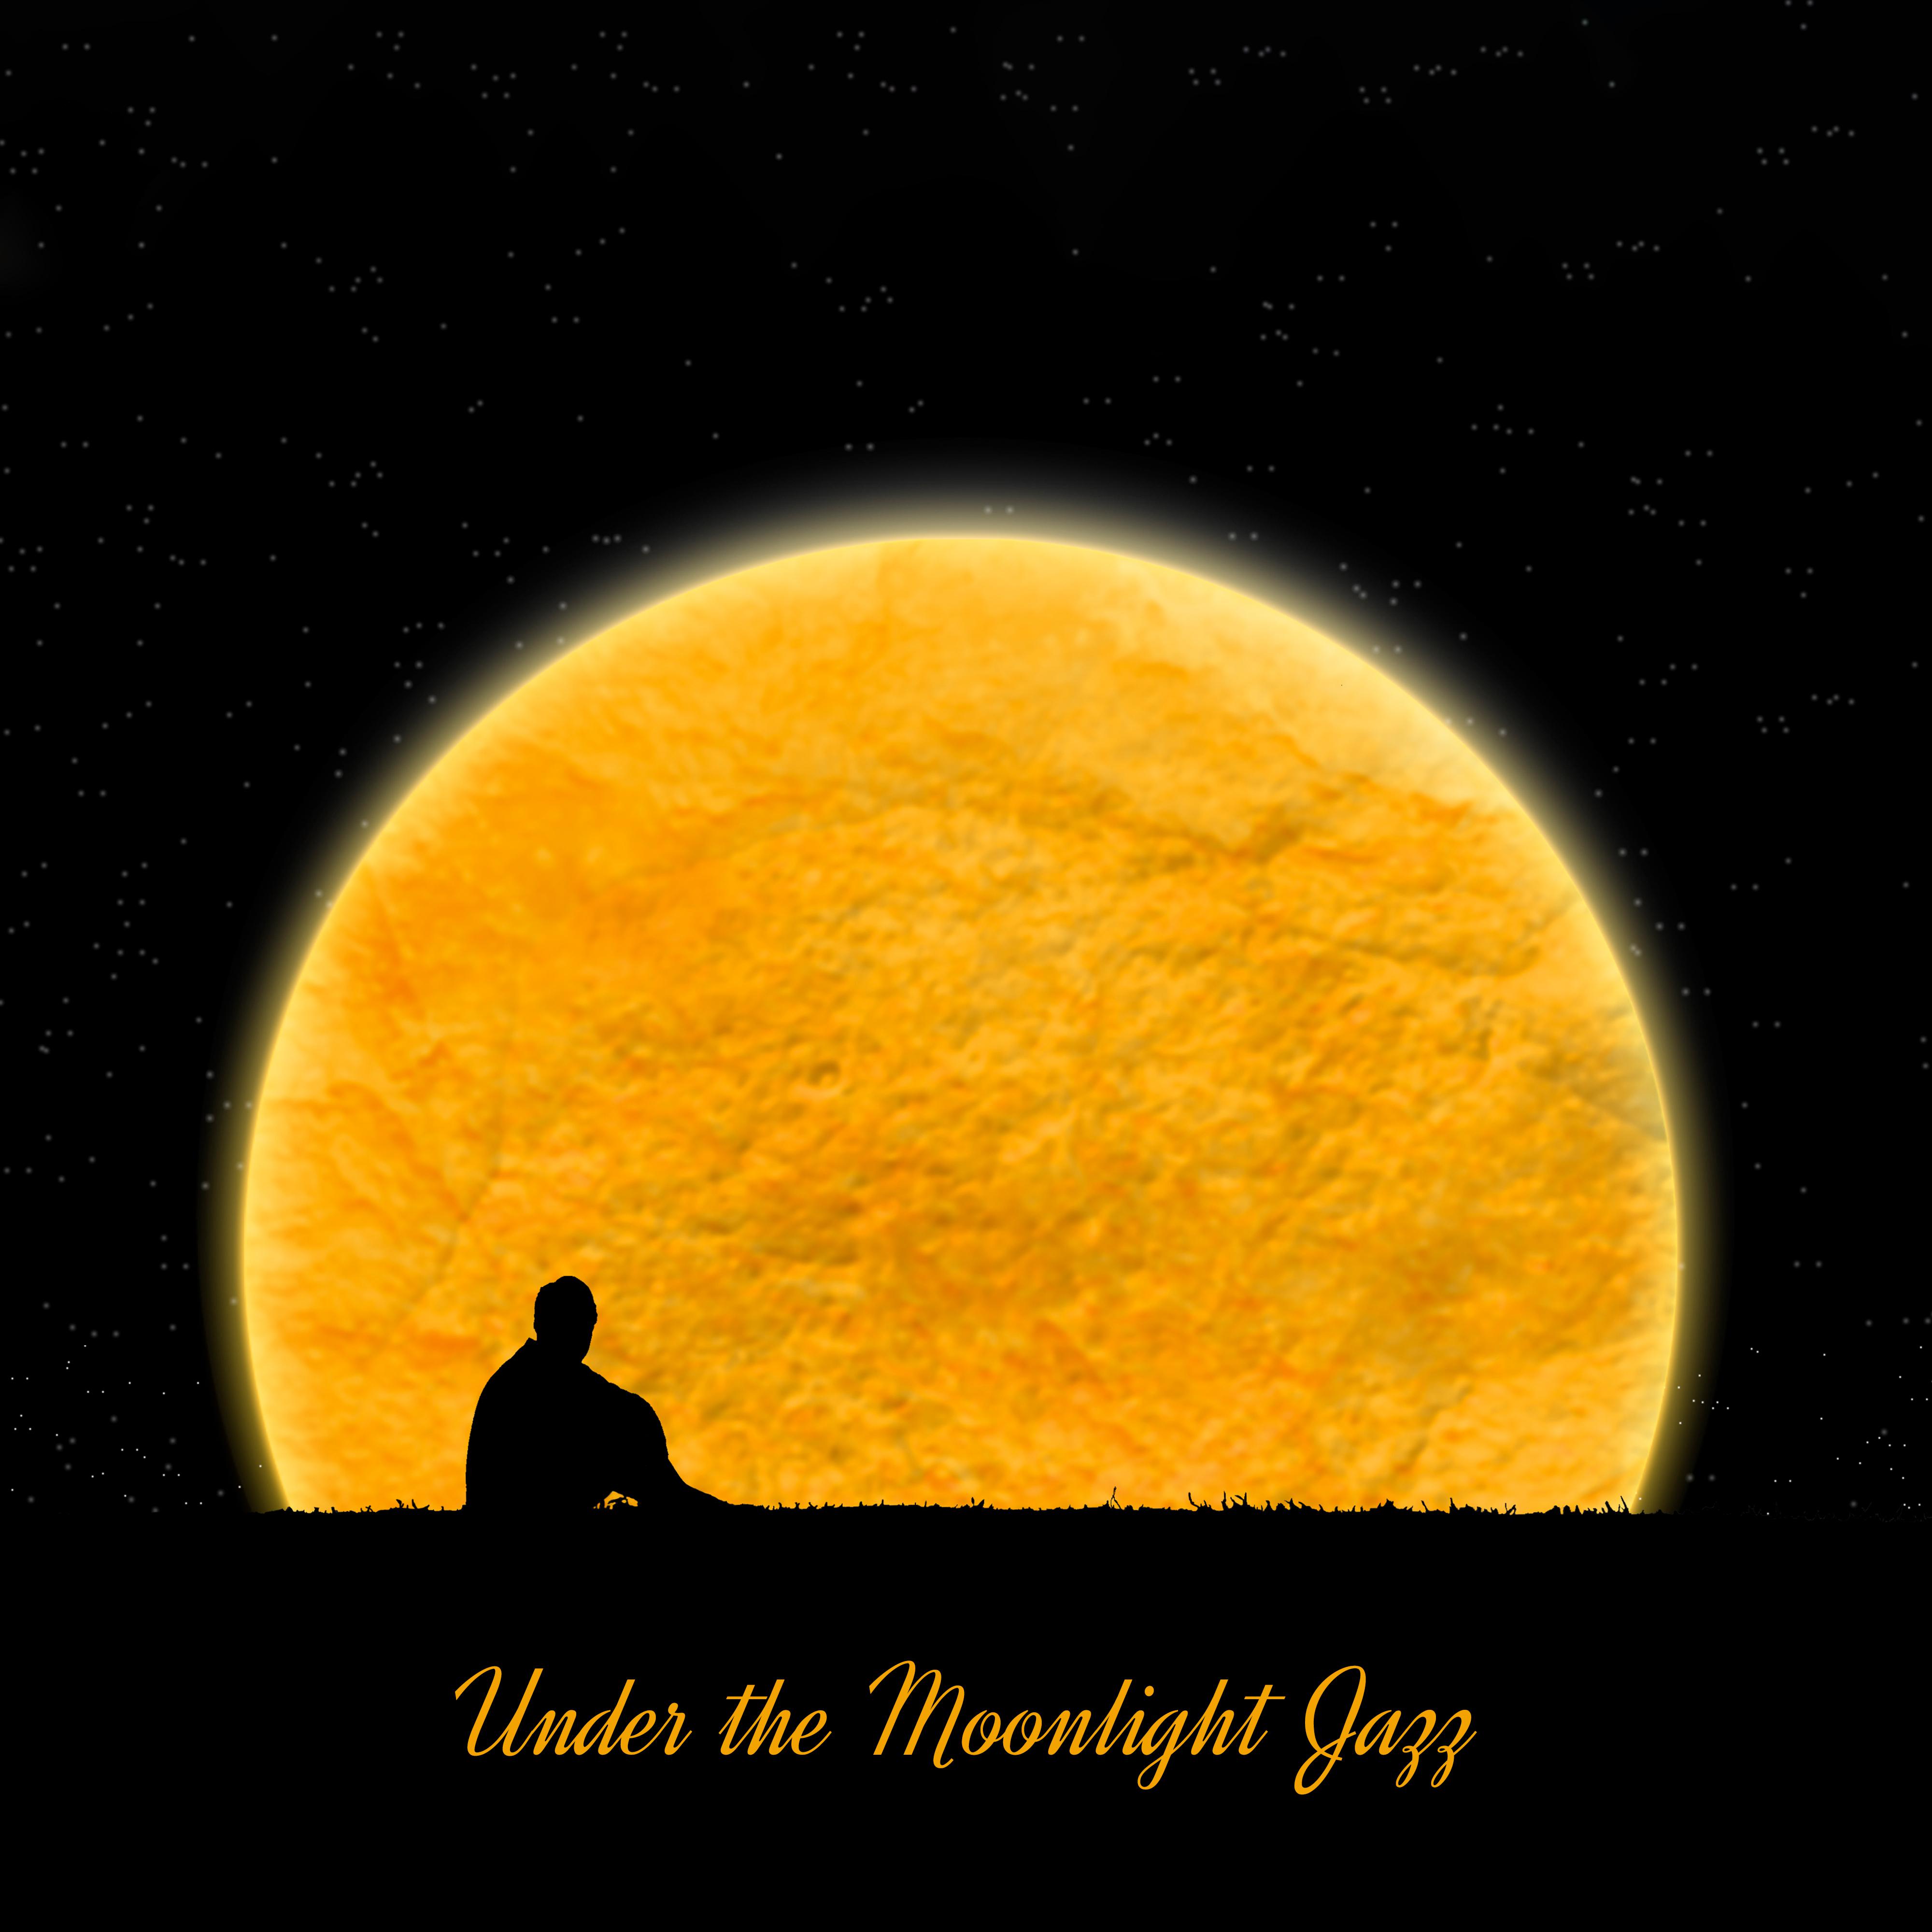 Under the Moonlight Jazz: 2019 Climatic Jazz for Lazy Evening, Instrumental Music with Vintage Melodies, Piano, Sax Sounds, Romantic Time Spending with Love